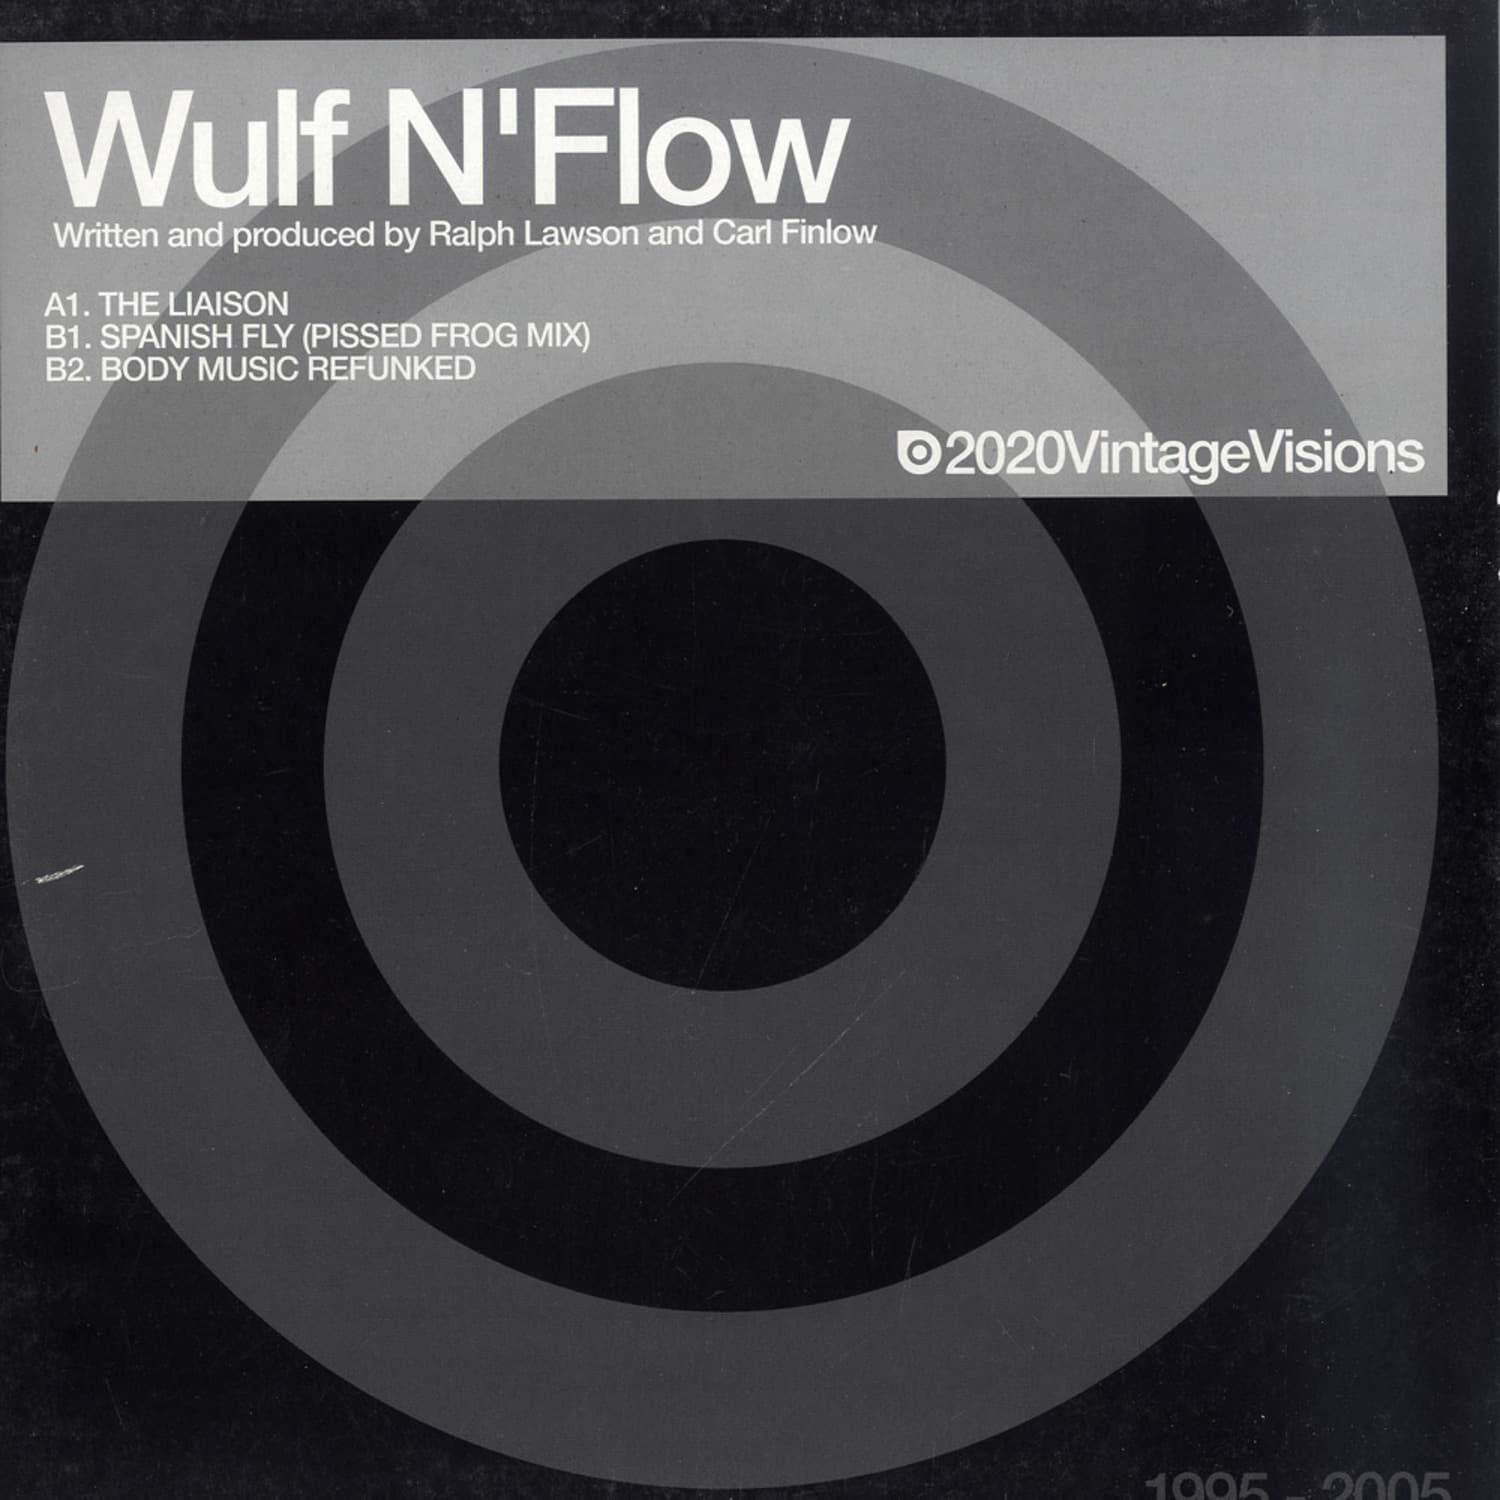 Wulf N Flow - THE LIAISON / SPANISH FLY / BODY MUSIC REFUNKED